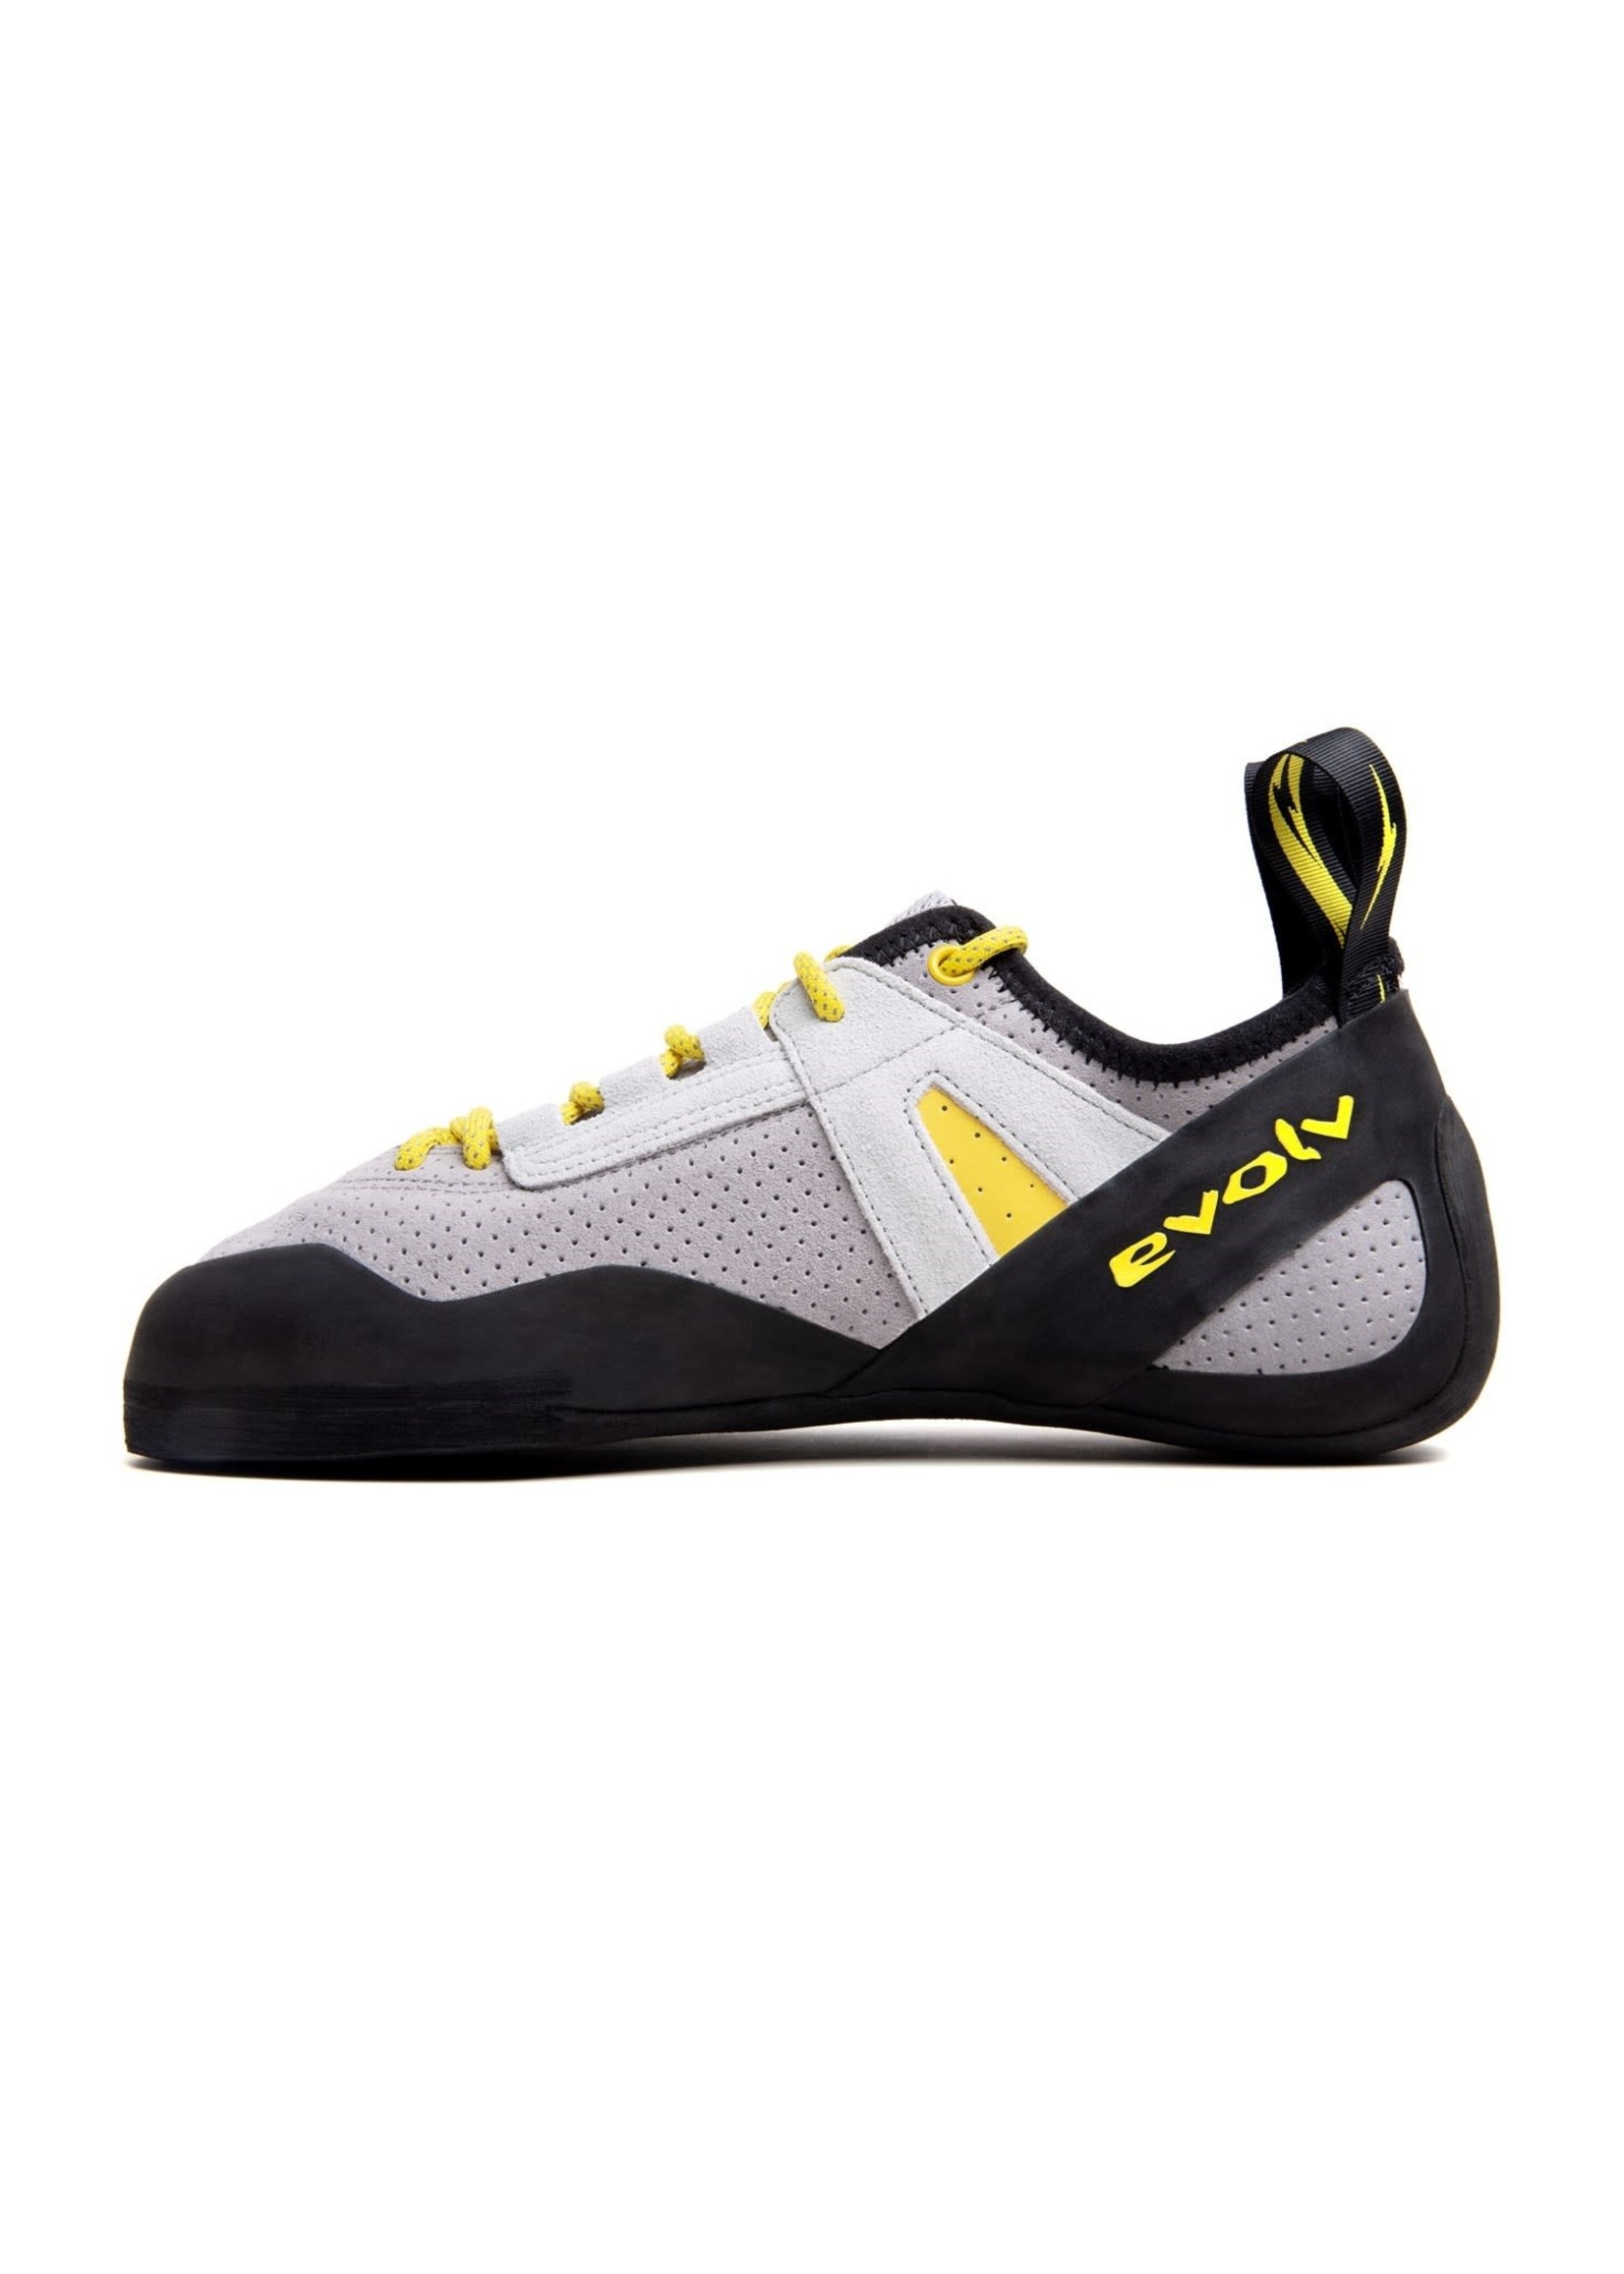 Evolv Chausson Evolv Defy Lace - Homme